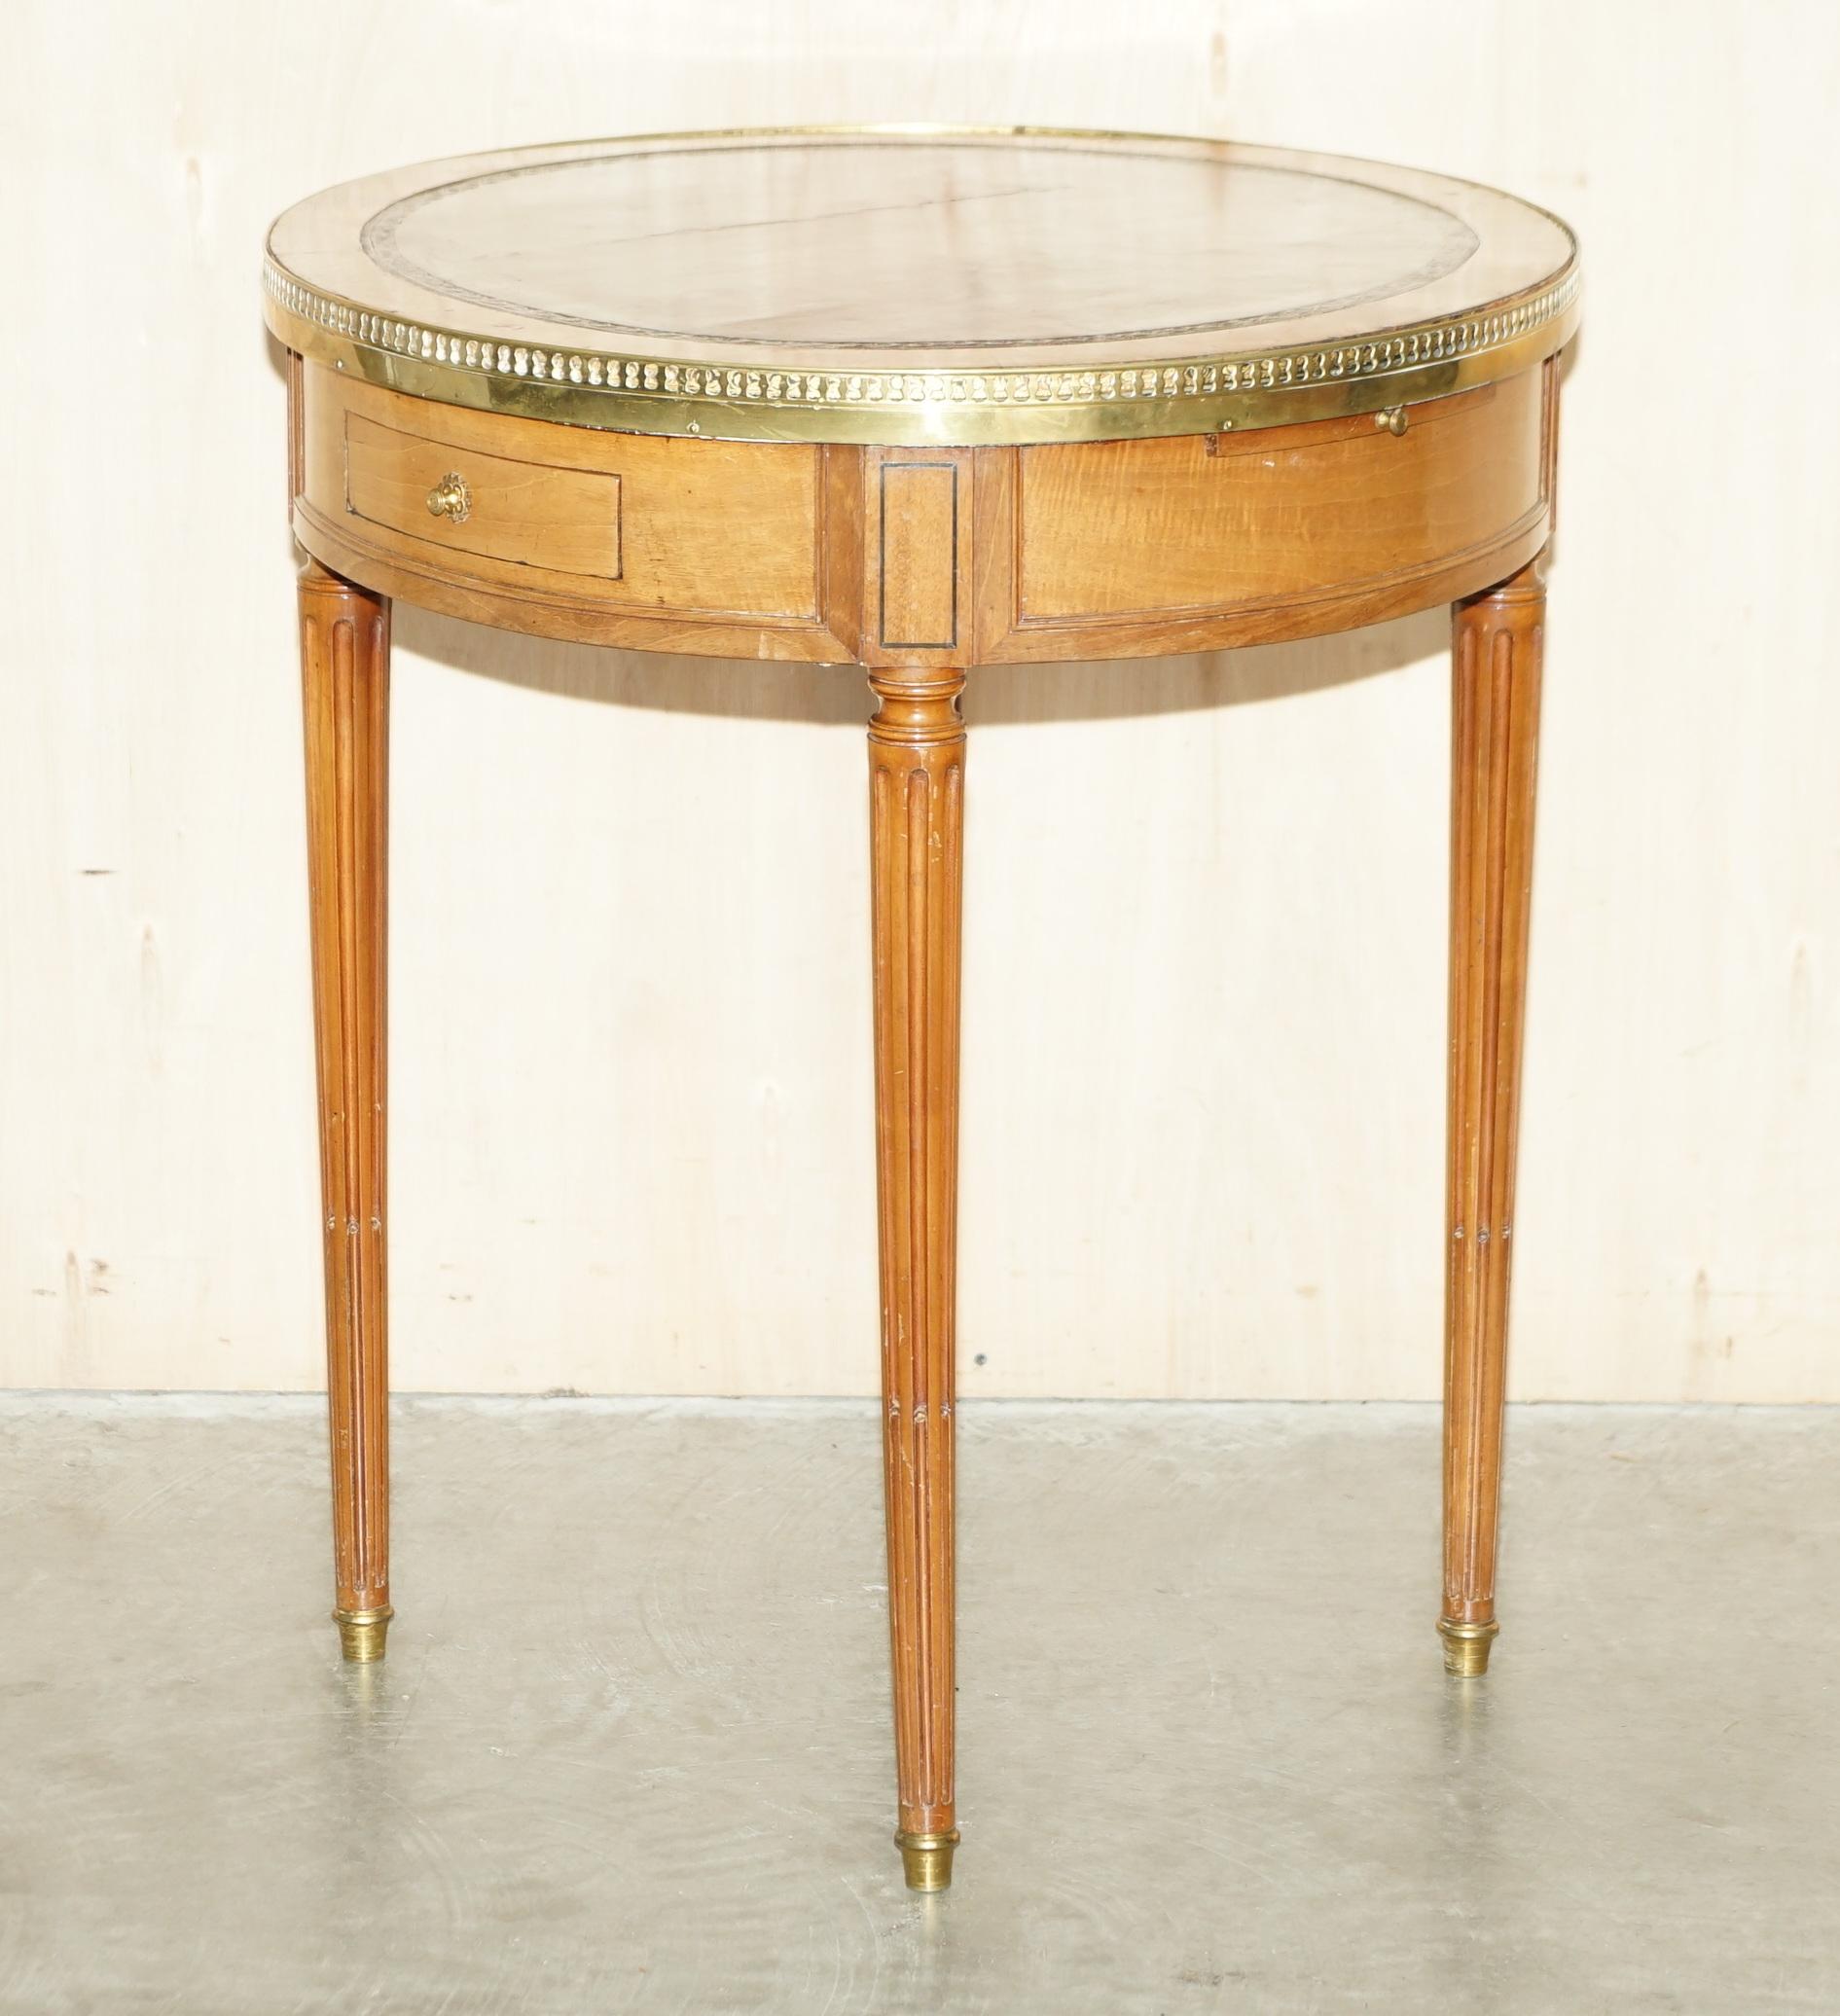 We are delighted to offer for sale this lovely unique French Napoleon III fully restored occasional table with brass gallery rail, brown leather top and butlers slip serving trays 

A good looking well made and desirable table, it has a Regency